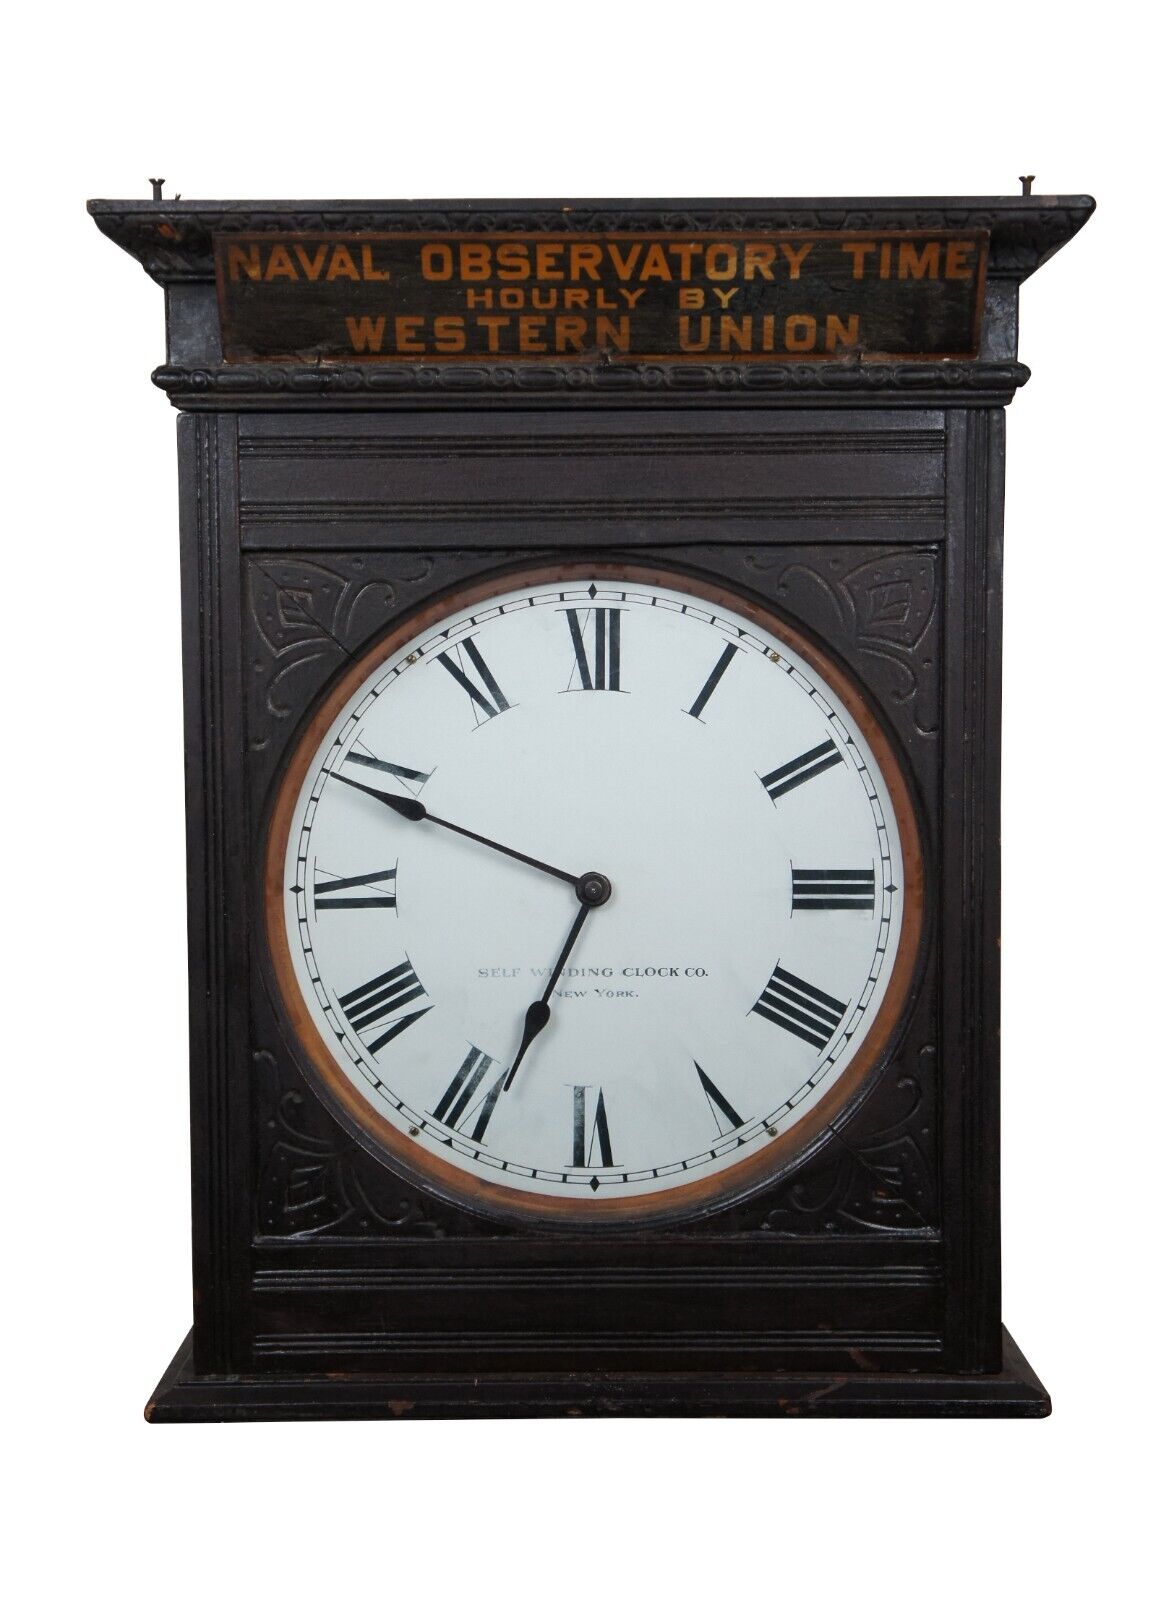 Rare Self Winding Clock Co Naval Observatory Time Western Union Wall Clock 26\